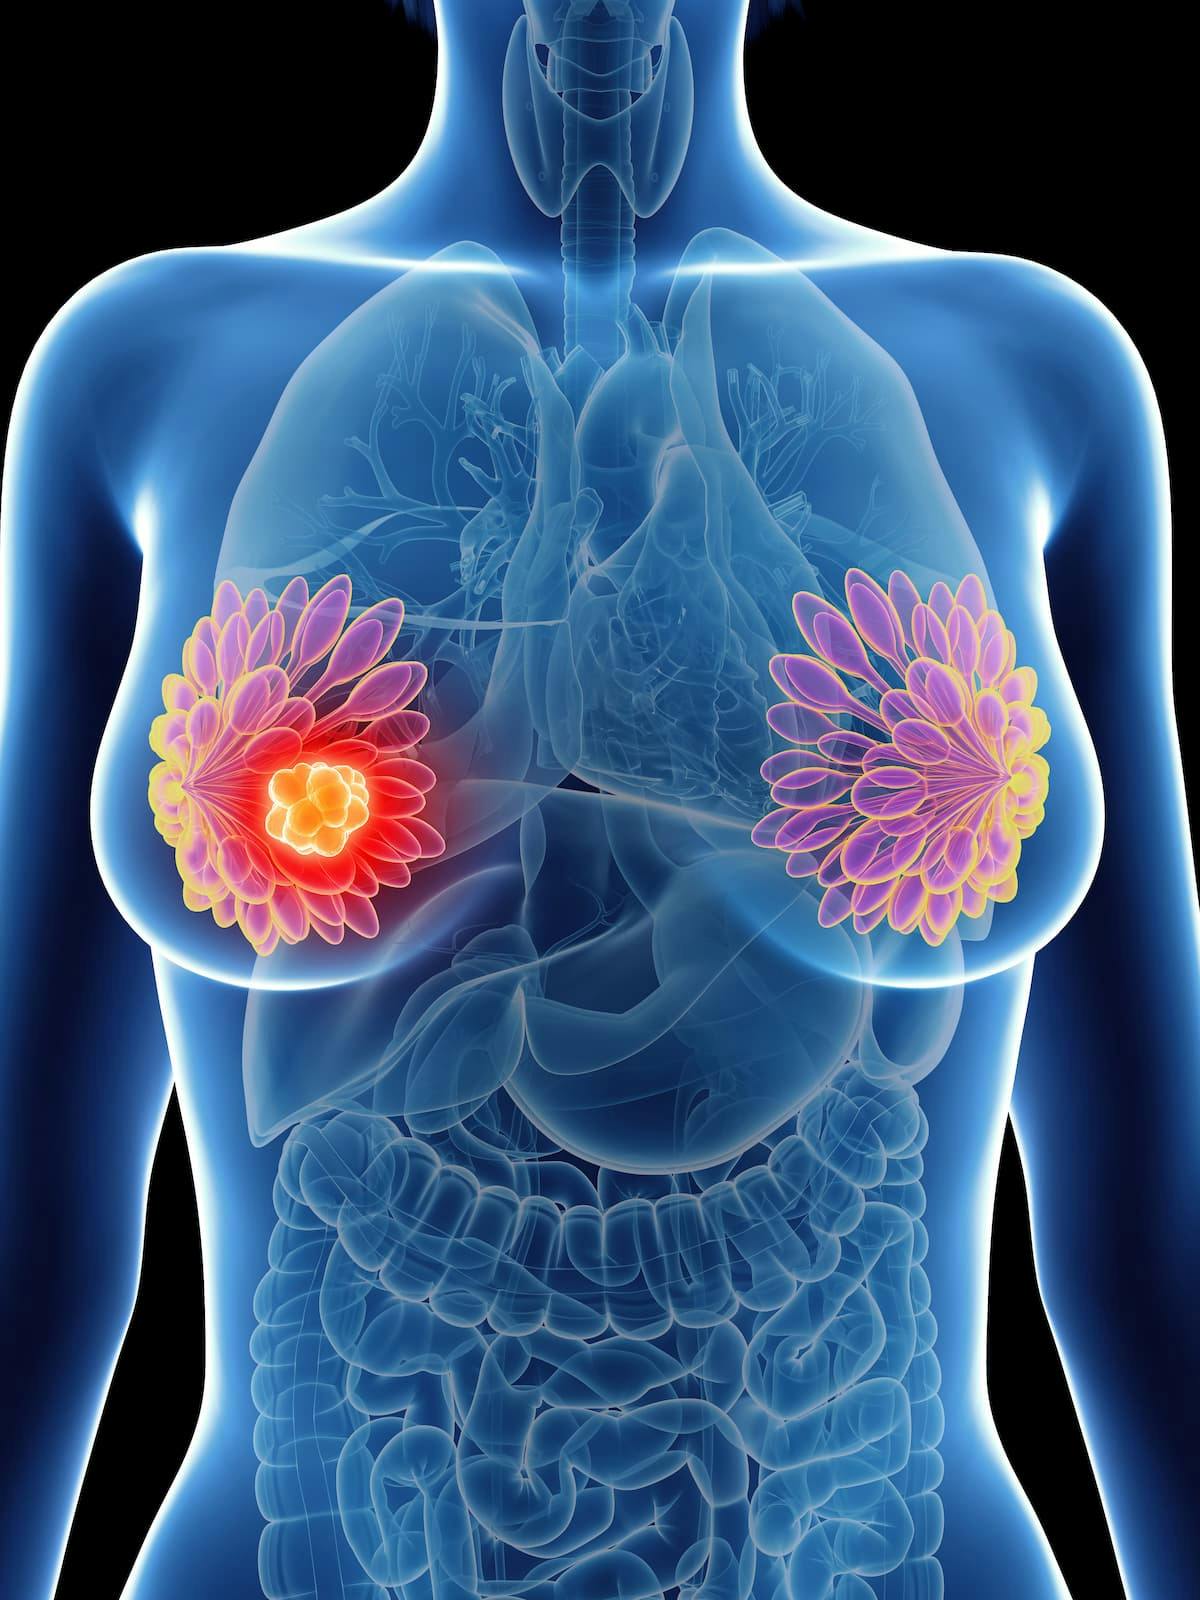 "Clinical activity of patritumab deruxtecan was observed across a broad range of HER3 membrane expression levels in patients with heavily pretreated ER-positive and triple-negative breast cancer. This is consistent with emerging data," according to an expert from Sarah Cannon Research Institute.